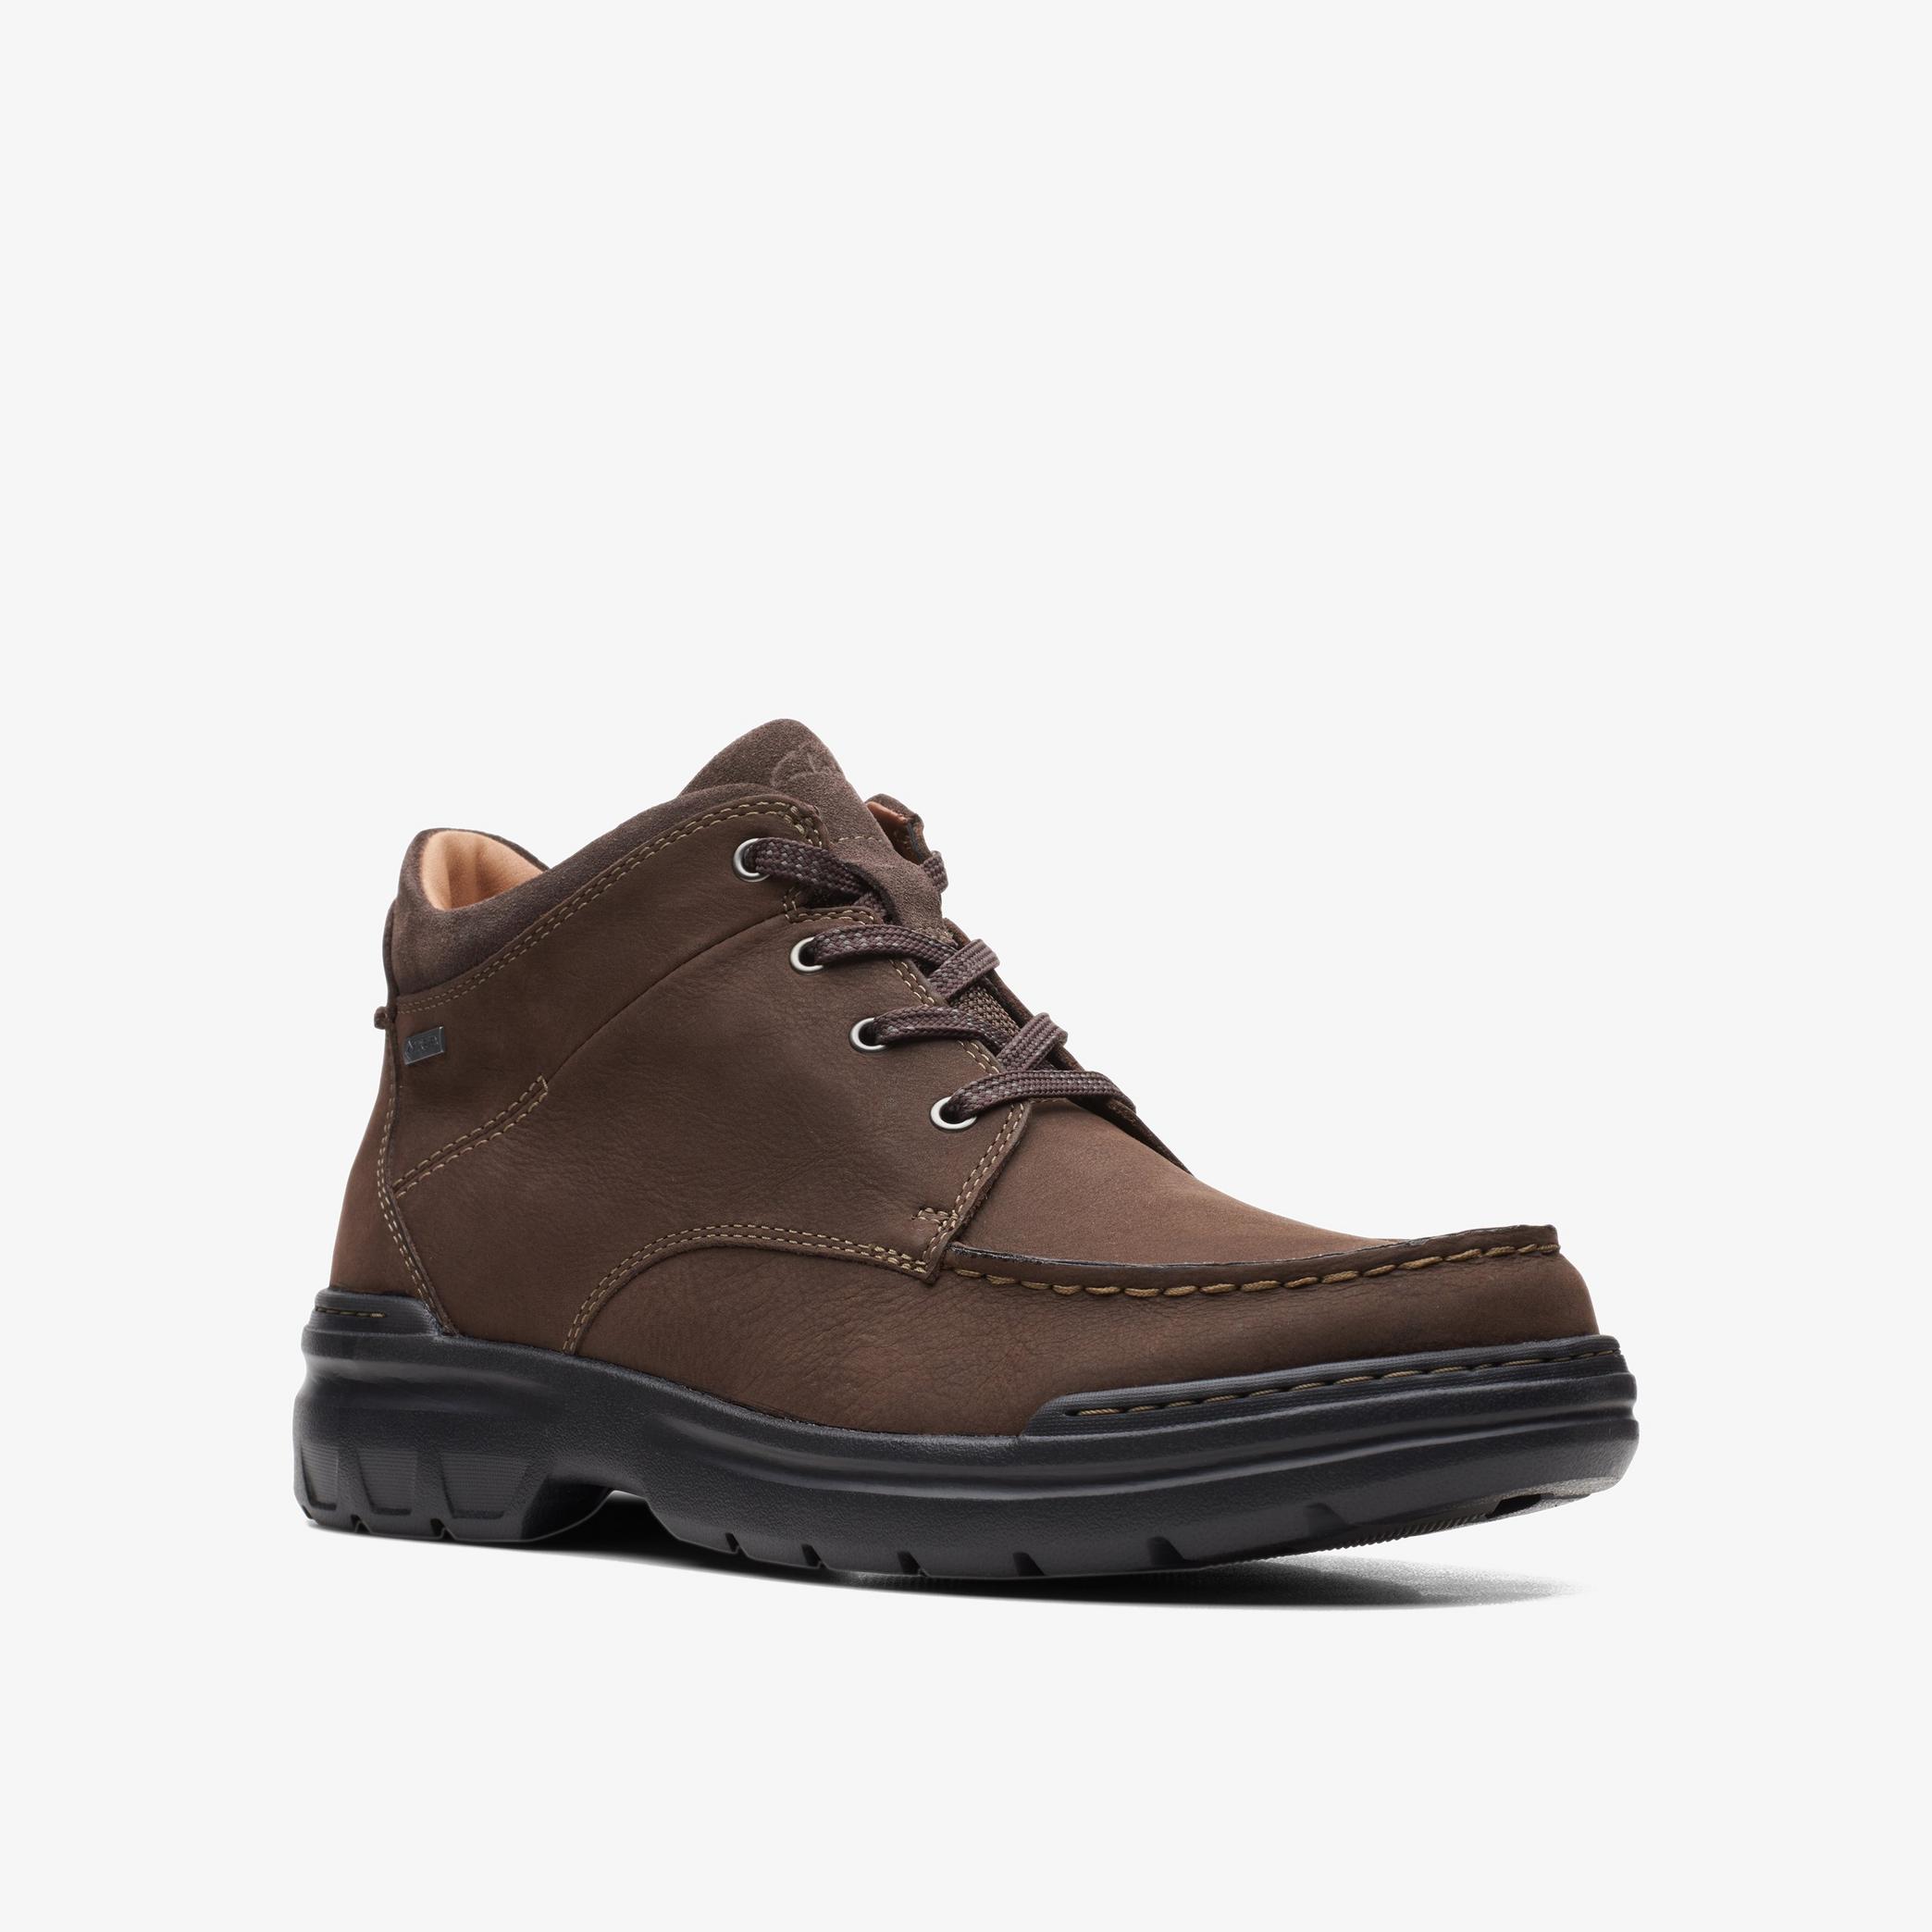 Rockie2 Hi GTX Brown Nubuck Ankle Boots, view 3 of 6